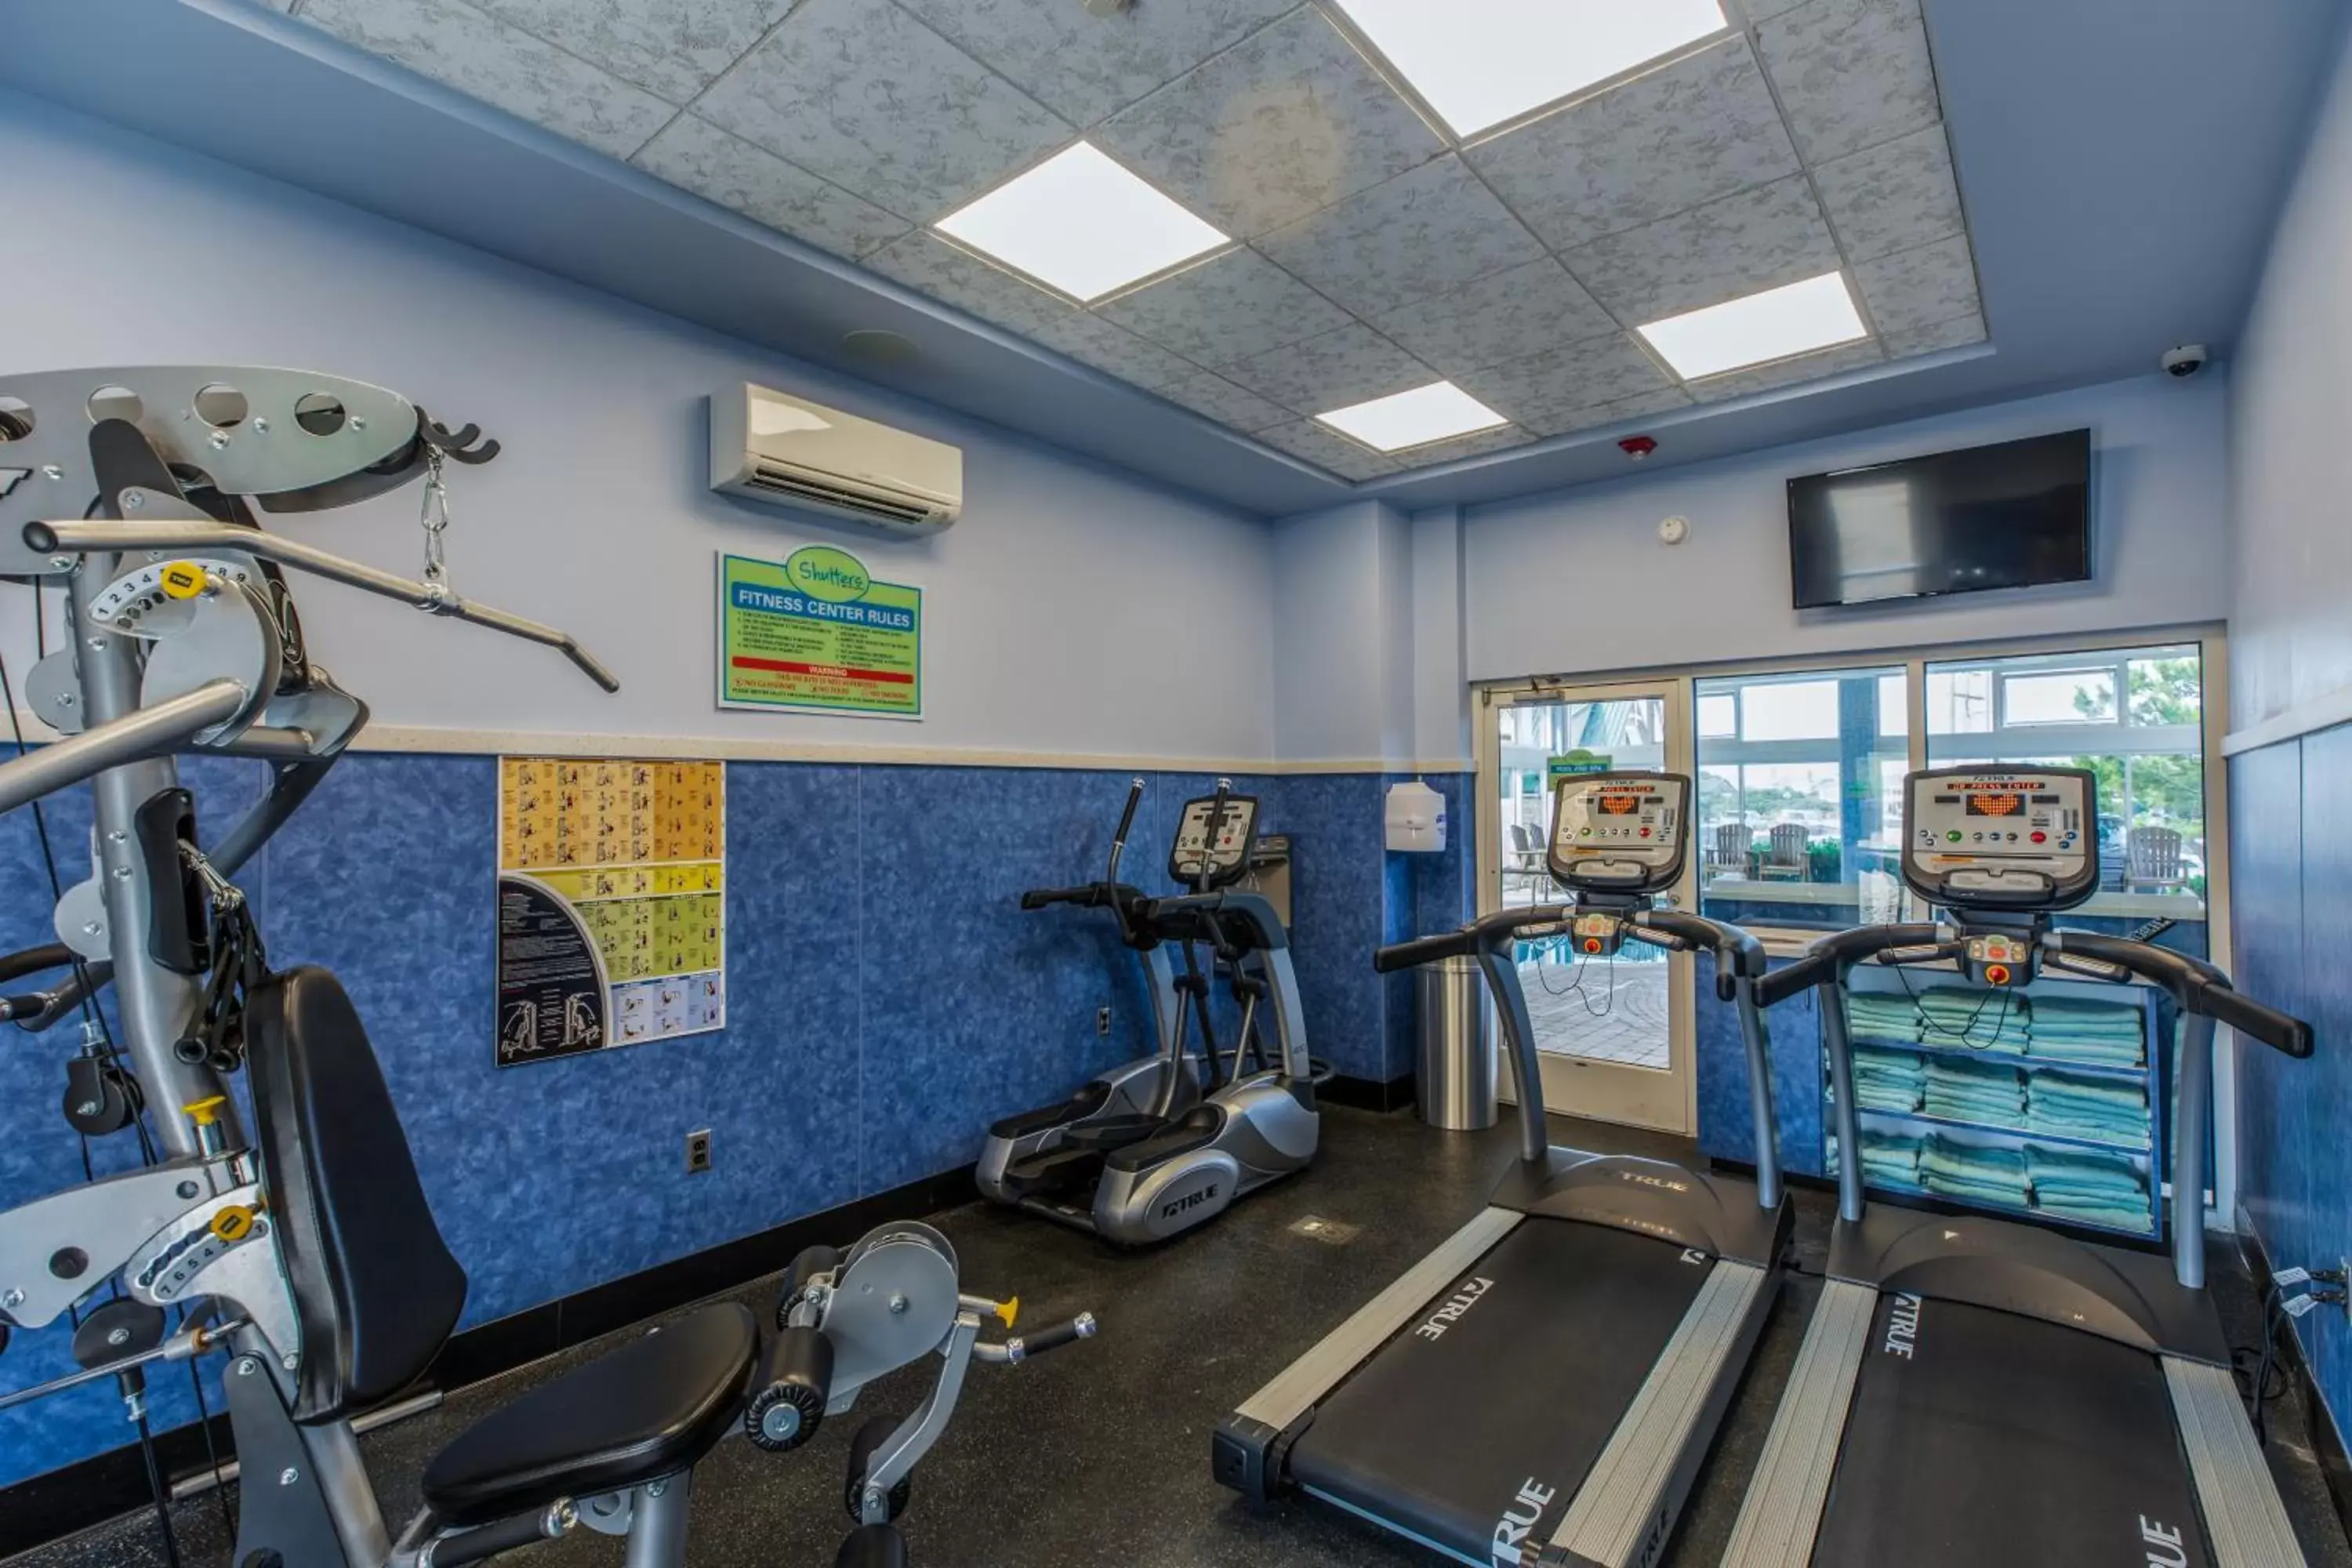 Fitness centre/facilities, Fitness Center/Facilities in Shutters on the Banks